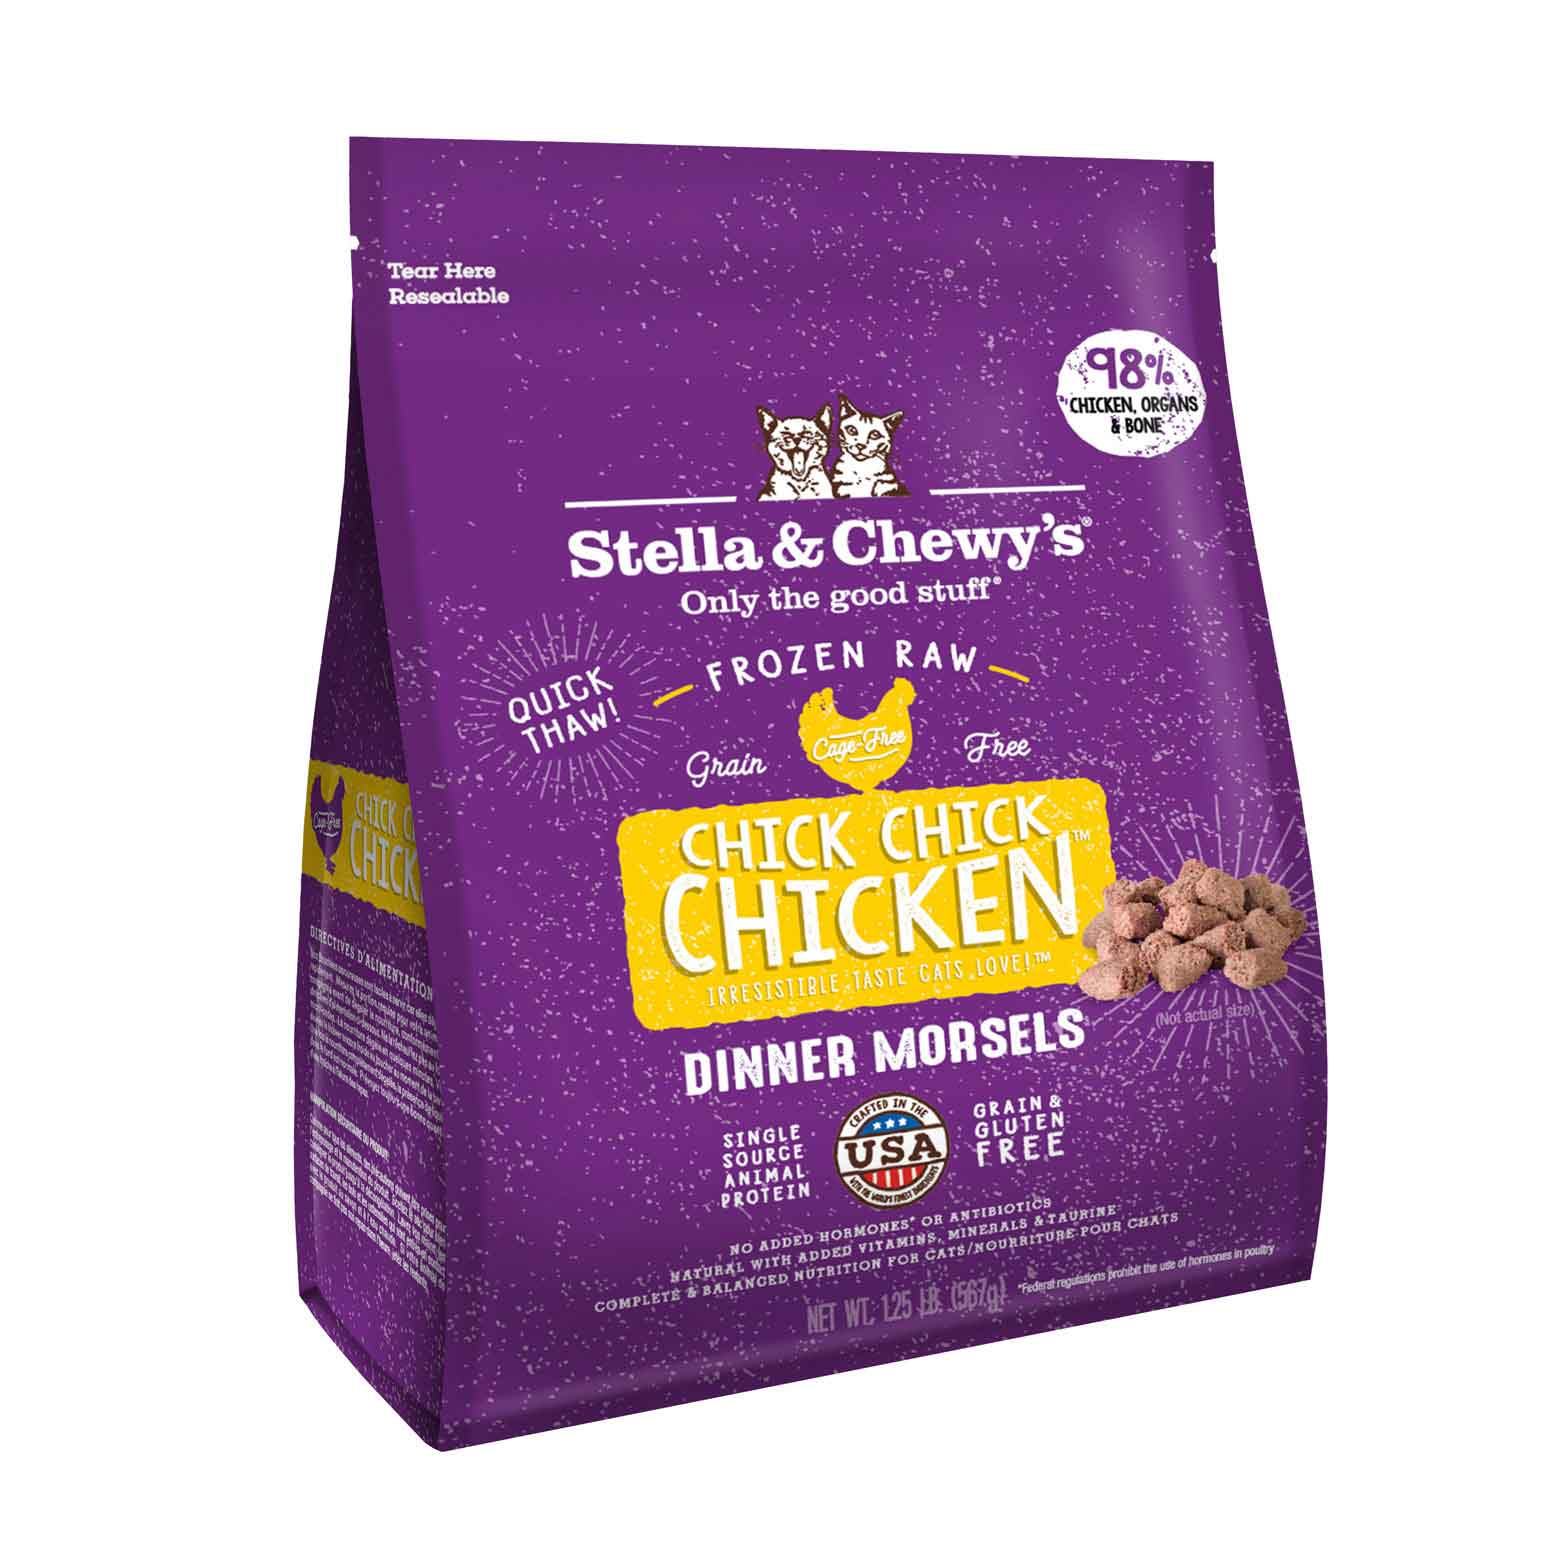 Stella & Chewy's Cat Frozen Raw, Chick Chick Chicken Morsels , 1.25 Pounds